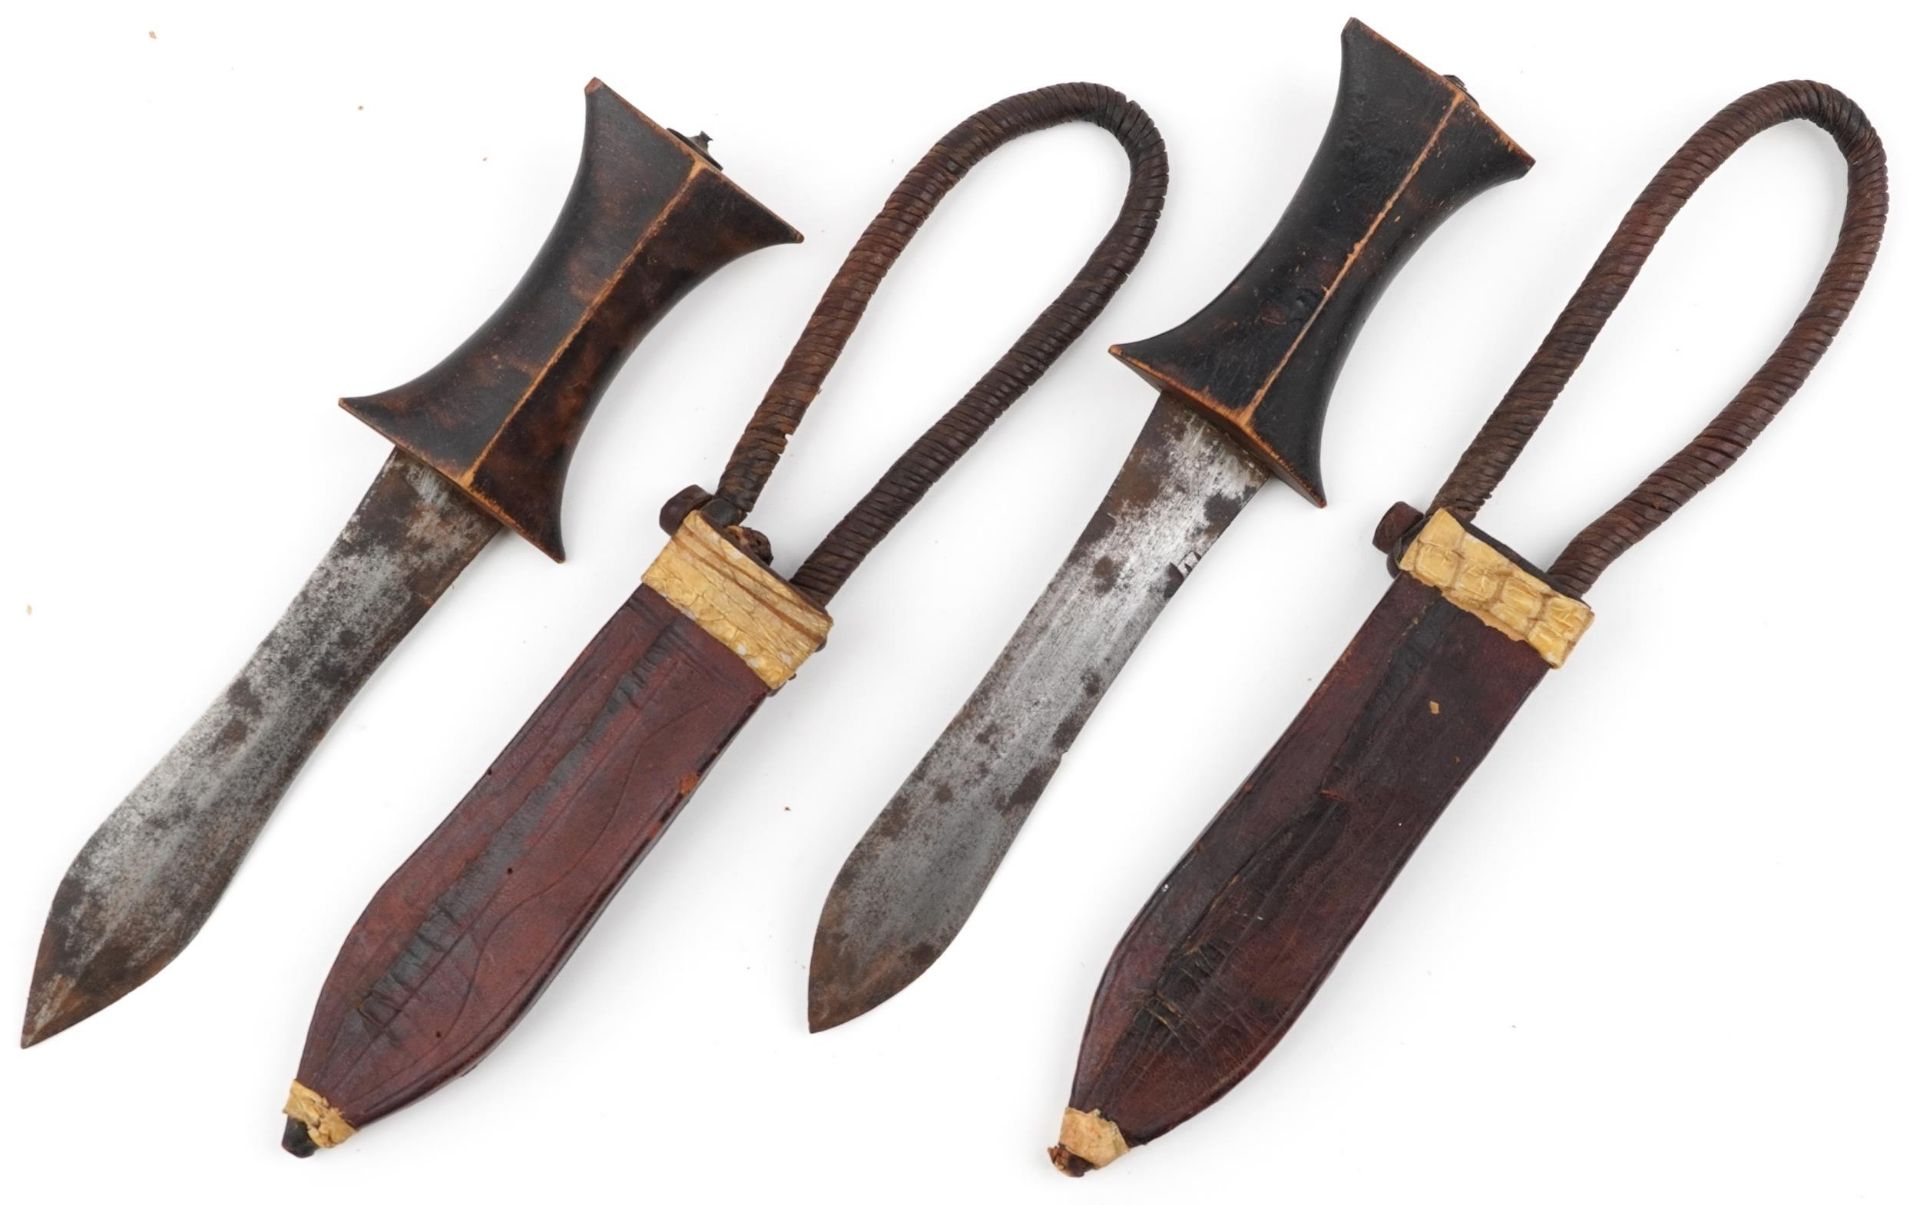 Pair of African Tribal daggers with wooden handles housed in leather sheaths having rope twist